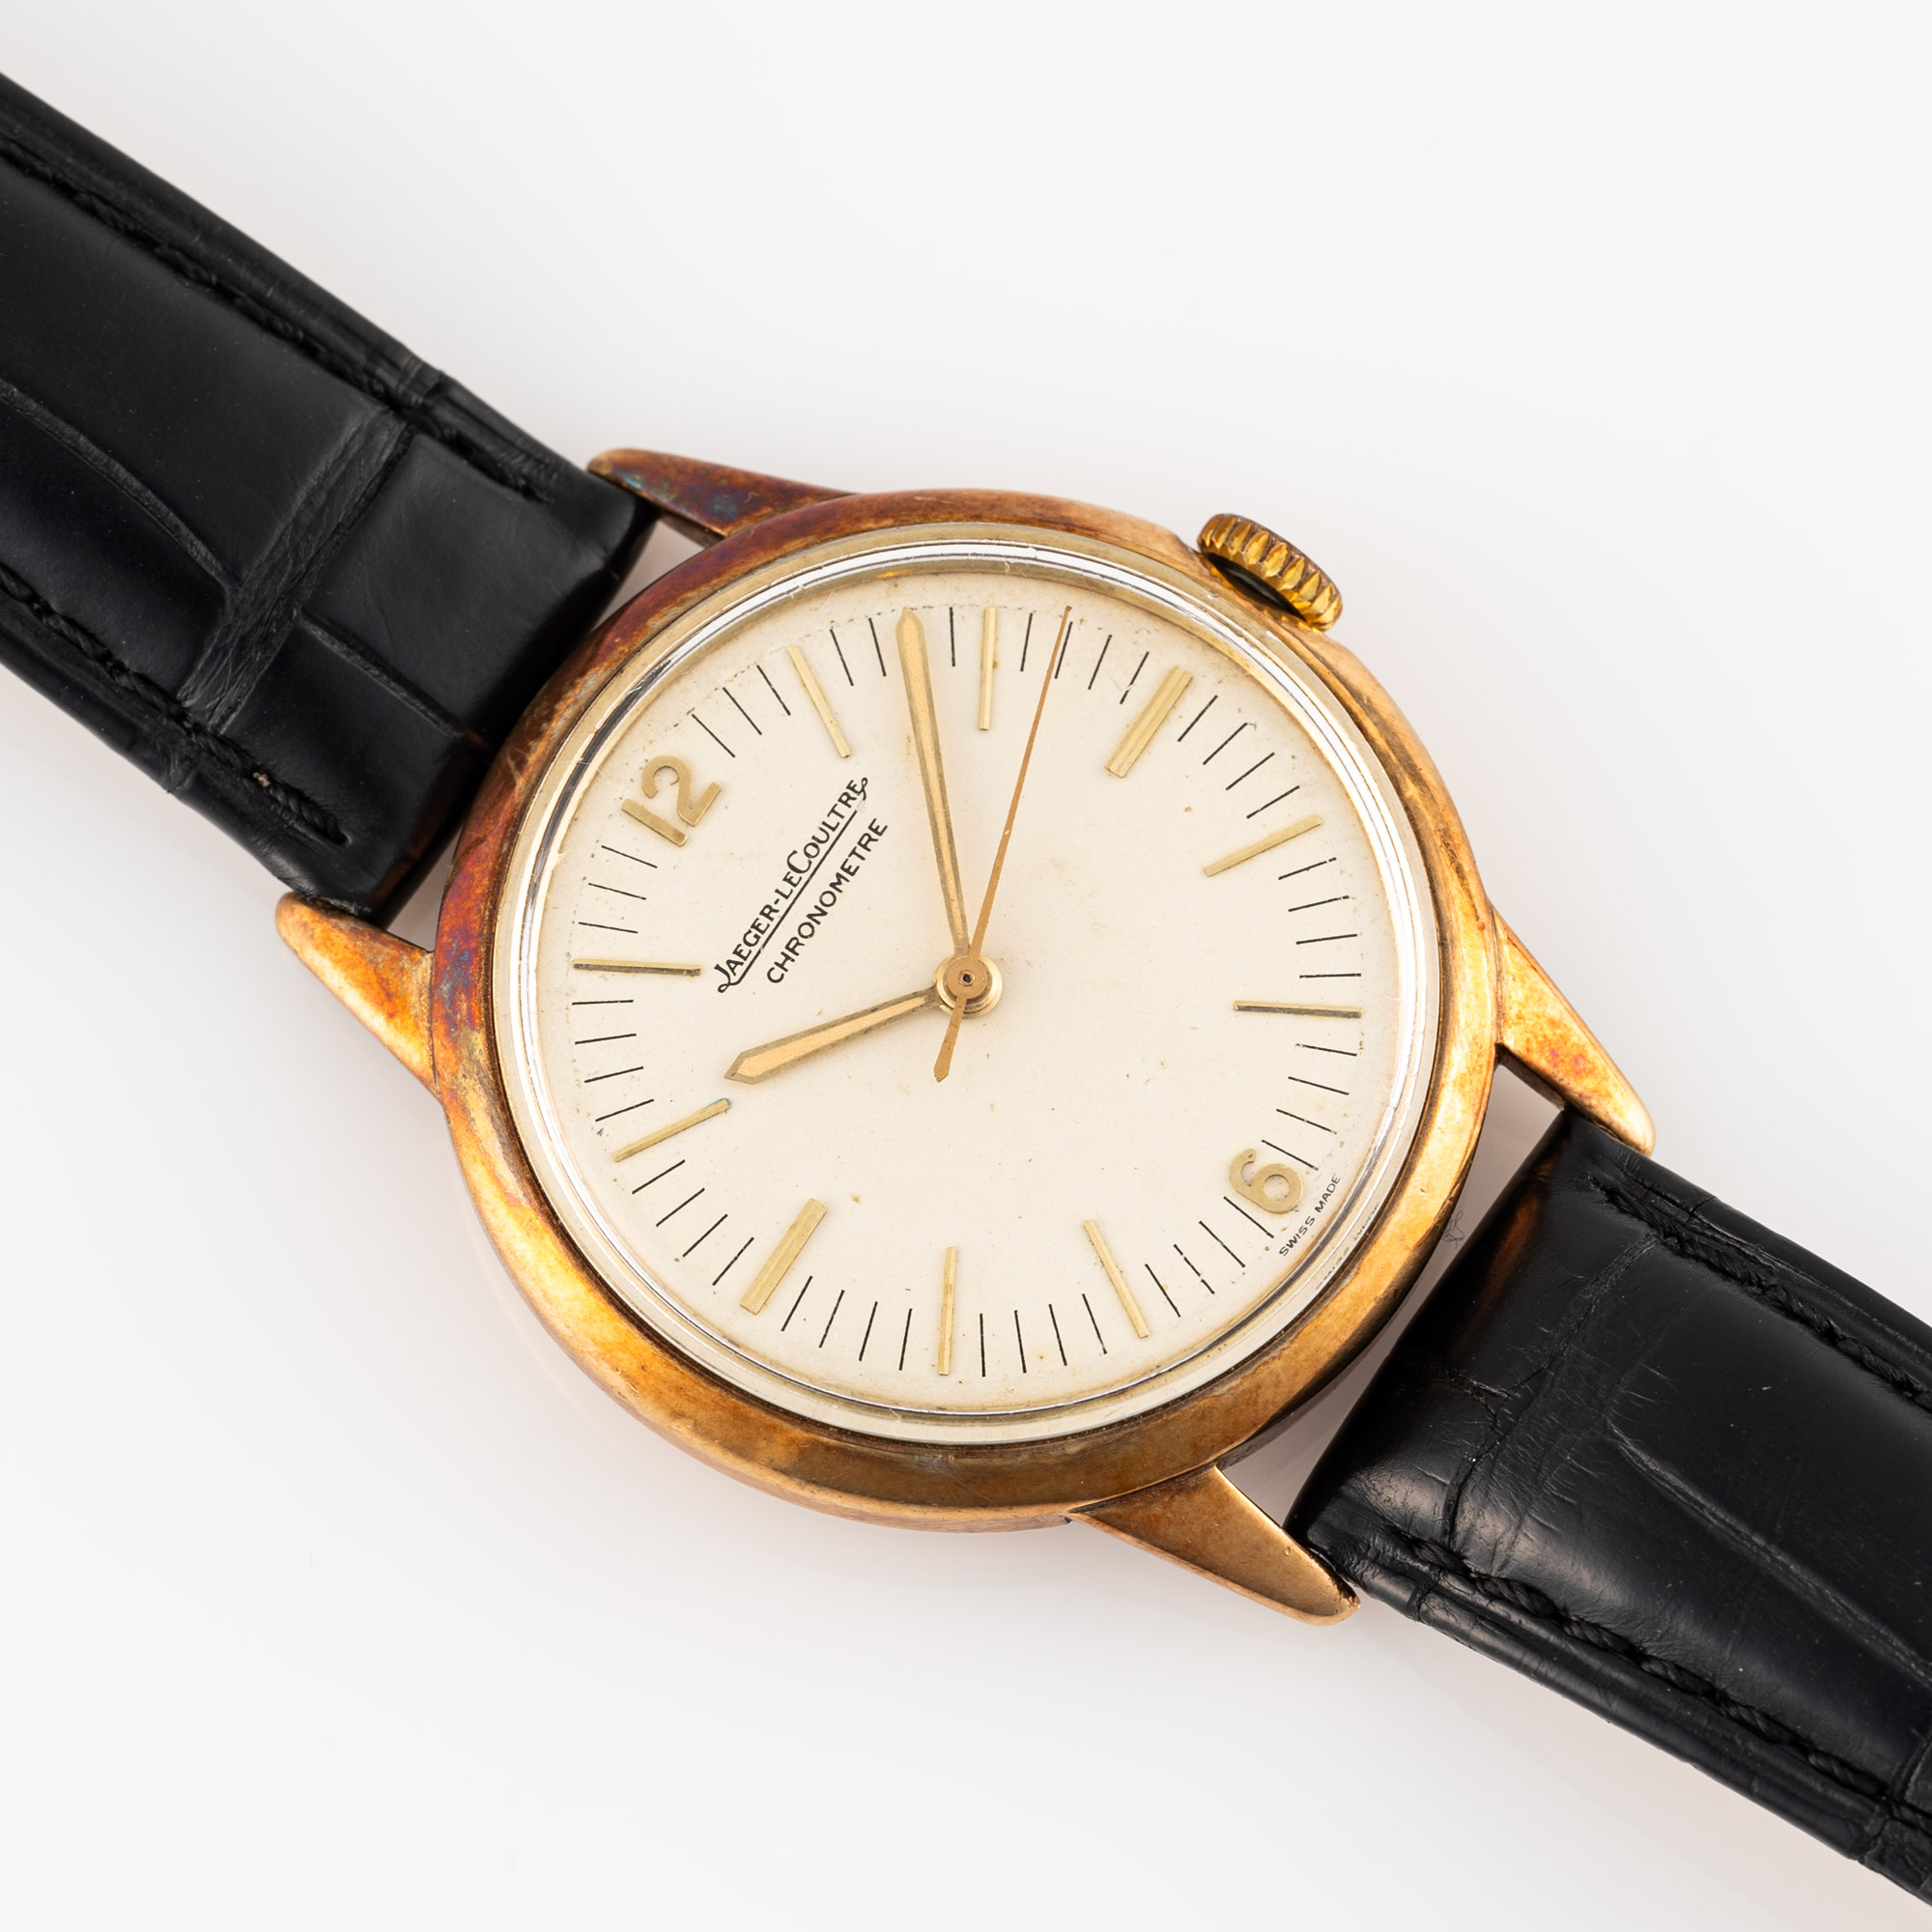 A RARE GENTLEMAN'S SIZE 9CT SOLID GOLD JAEGER LECOULTRE GEOPHYSIC CHRONOMETER WRIST WATCH CIRCA - Image 4 of 9